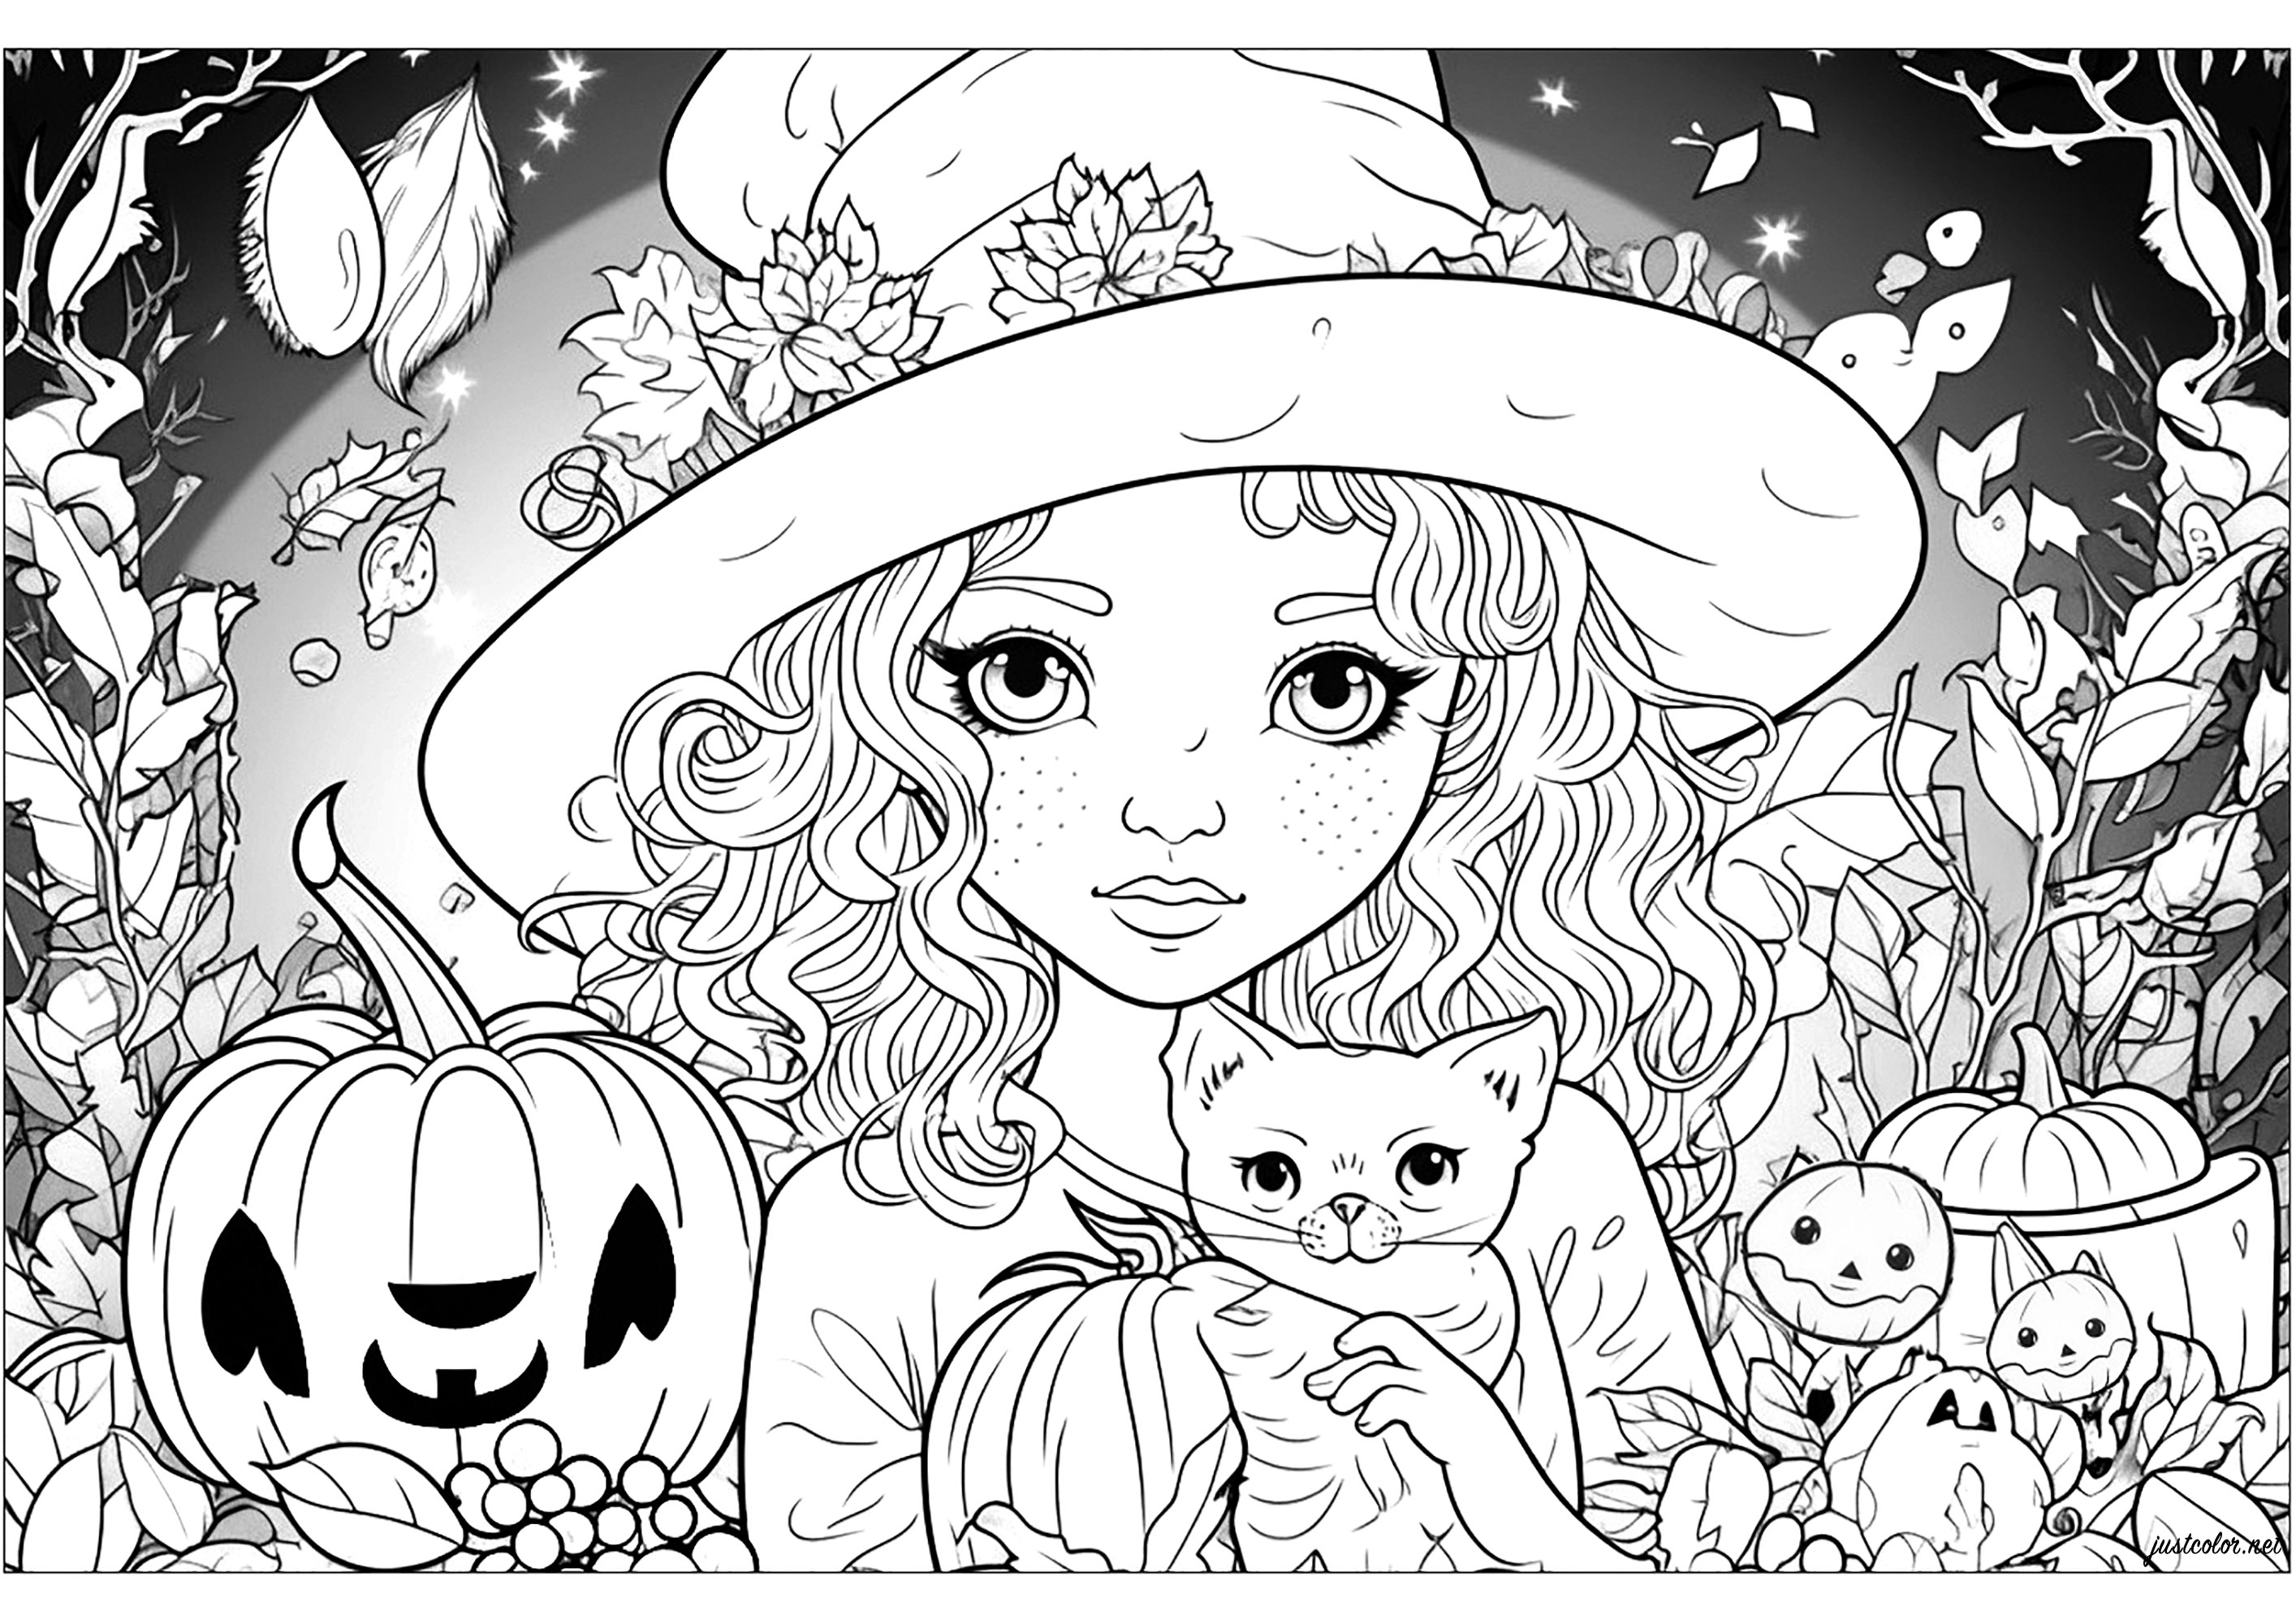 Young witch and her cat. Color in the many details and strange creatures that surround this pretty witch.